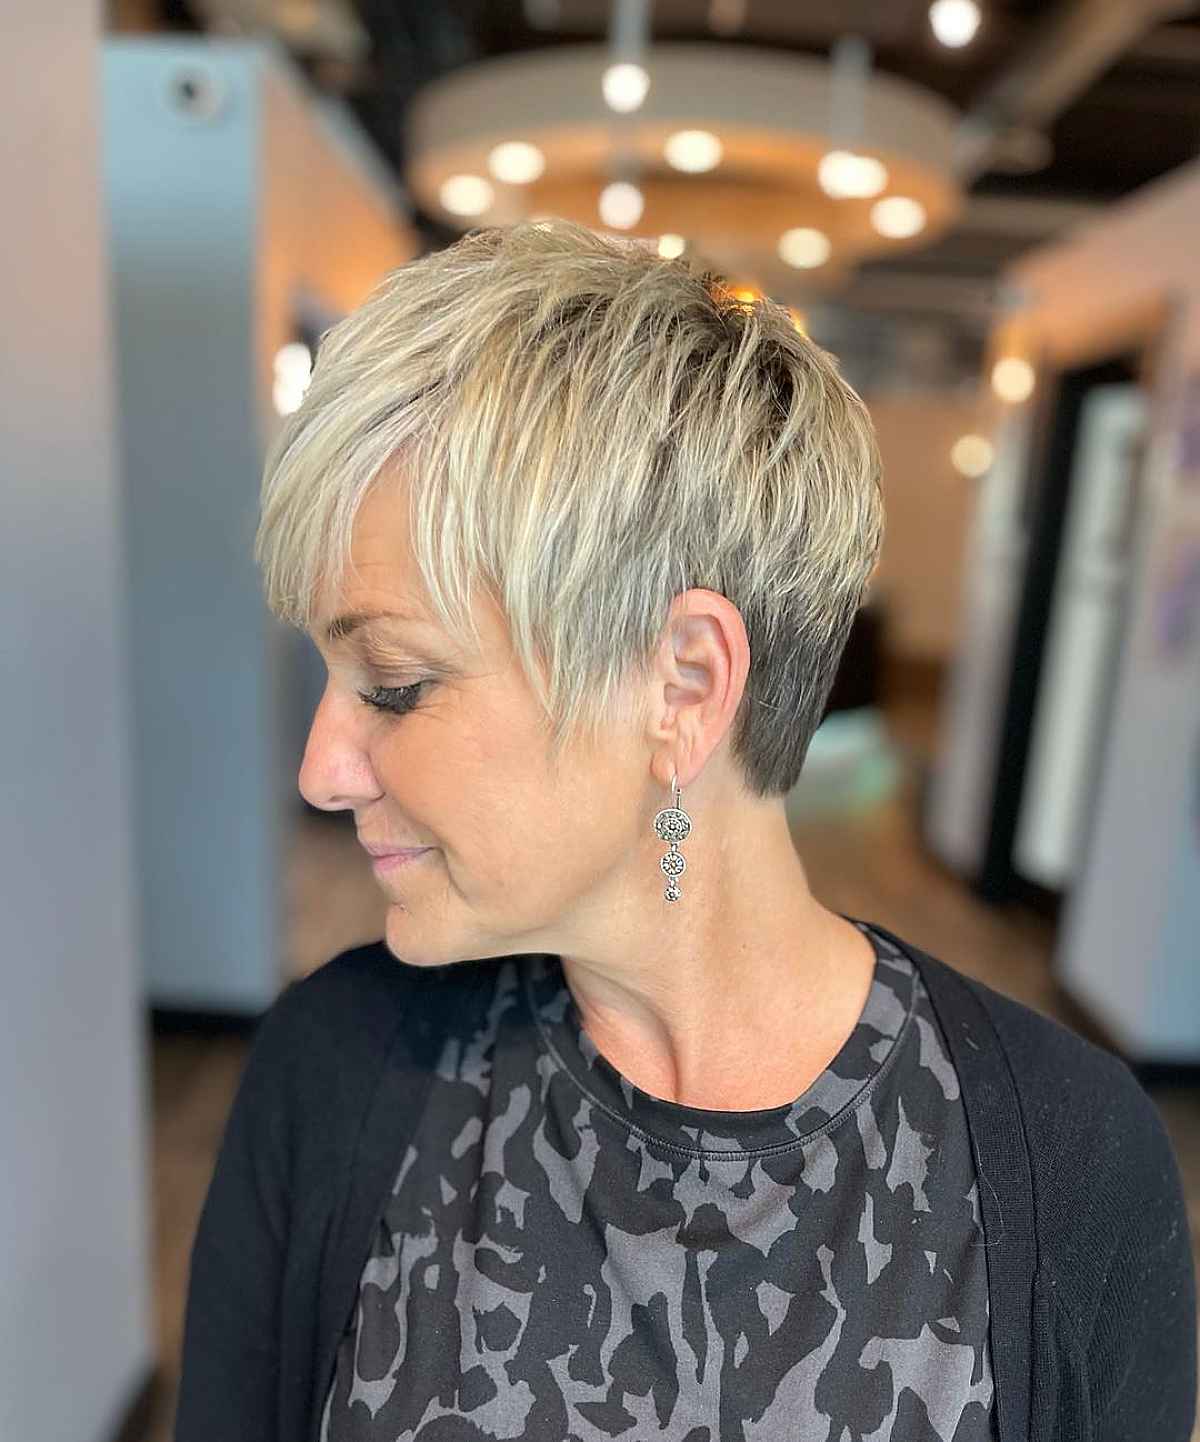 Trendsetting long pixie cut with bangs haircut